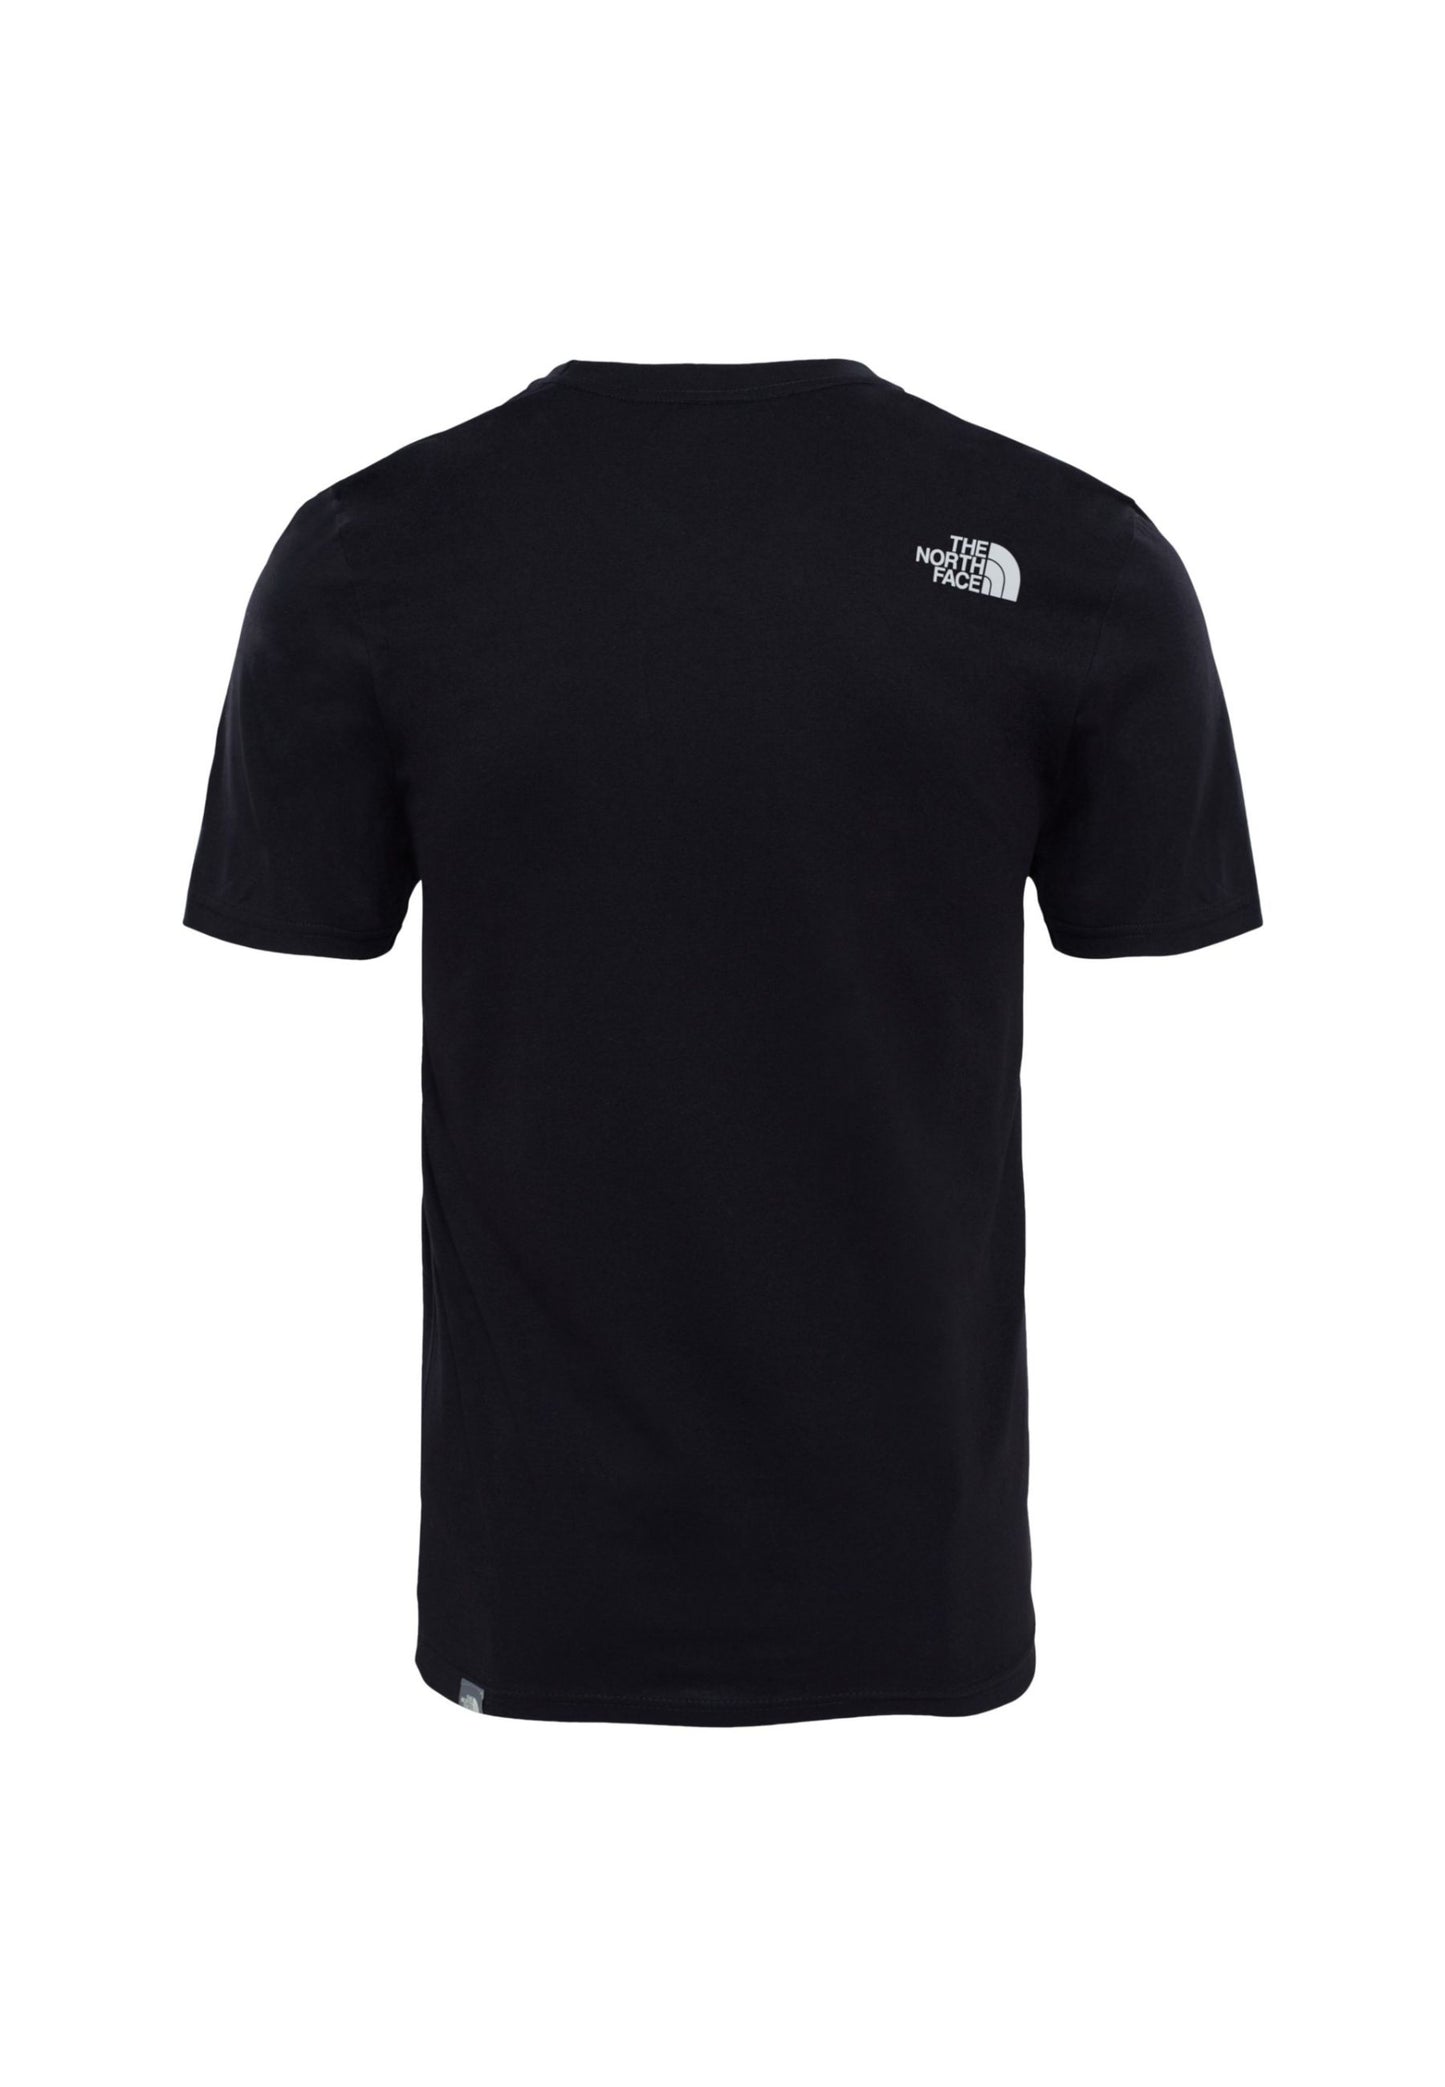 EASY THE NORTH FACE T-SHIRT